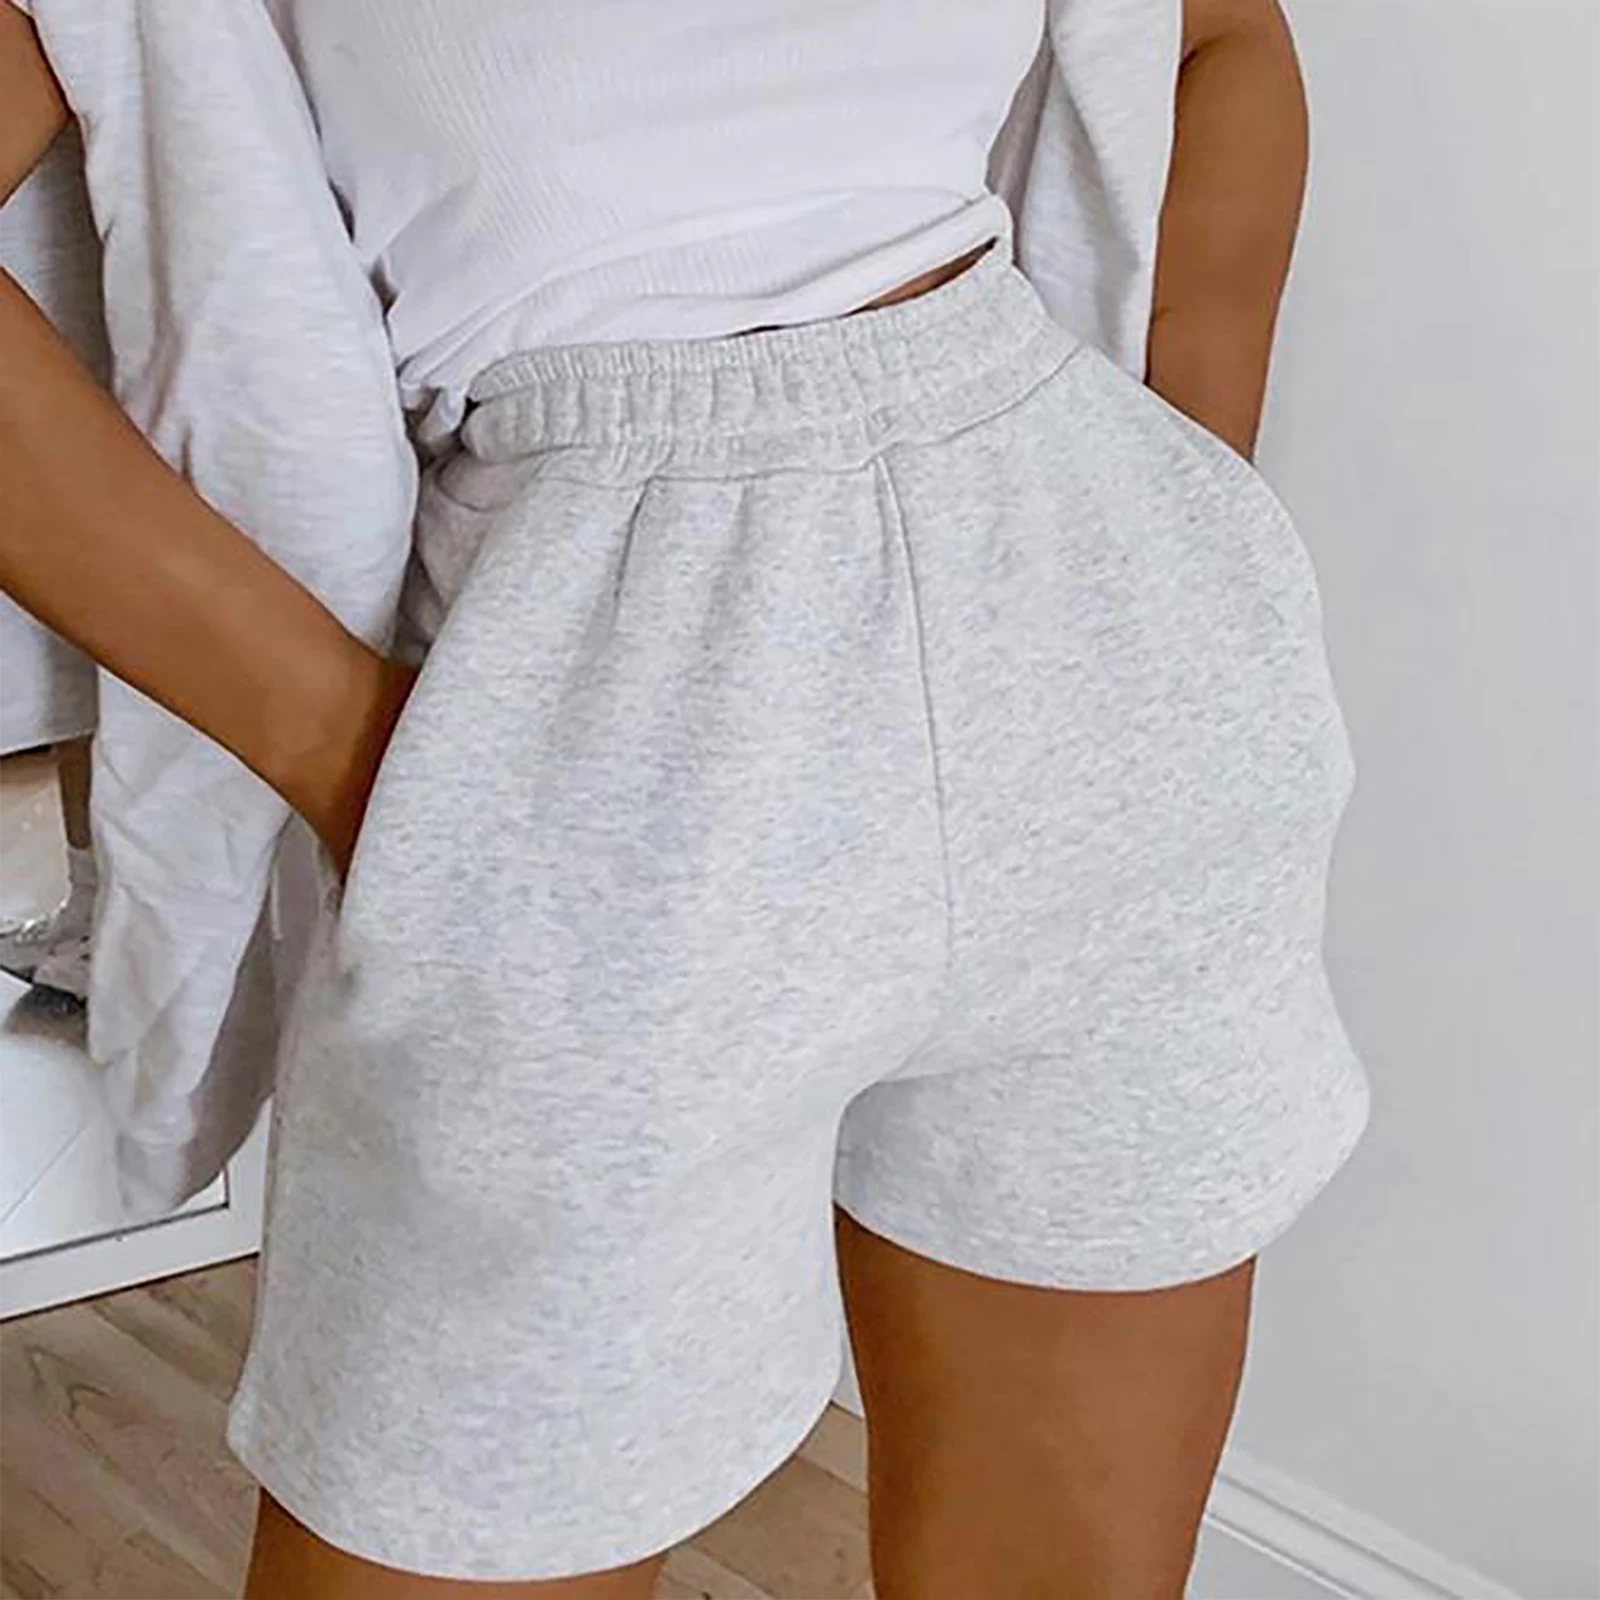 

2021 Hot Women Fashion Solid Color Shorts High Waist Casual Style Short Sweatpants with Slant Pockets Summer Ladies Loose Shorts